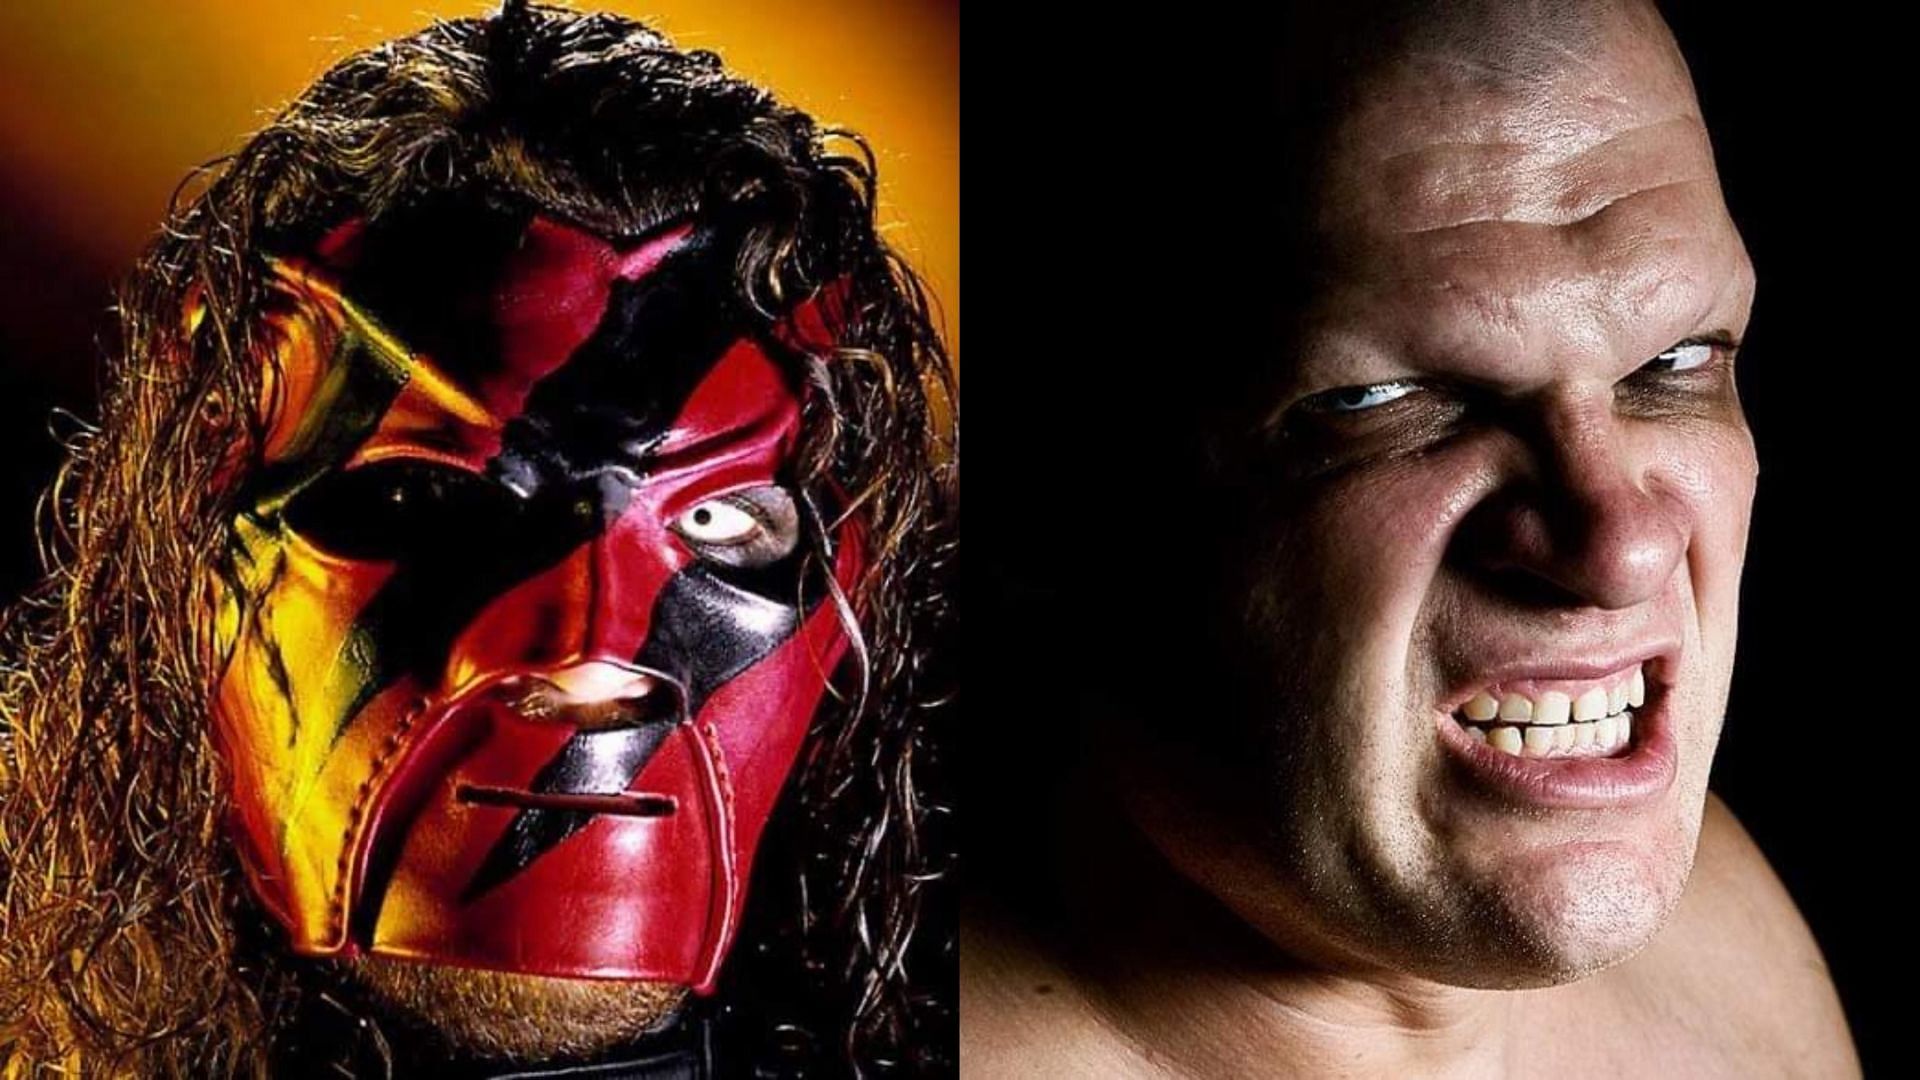 Kane is one of the most intimidating stars in WWE history.